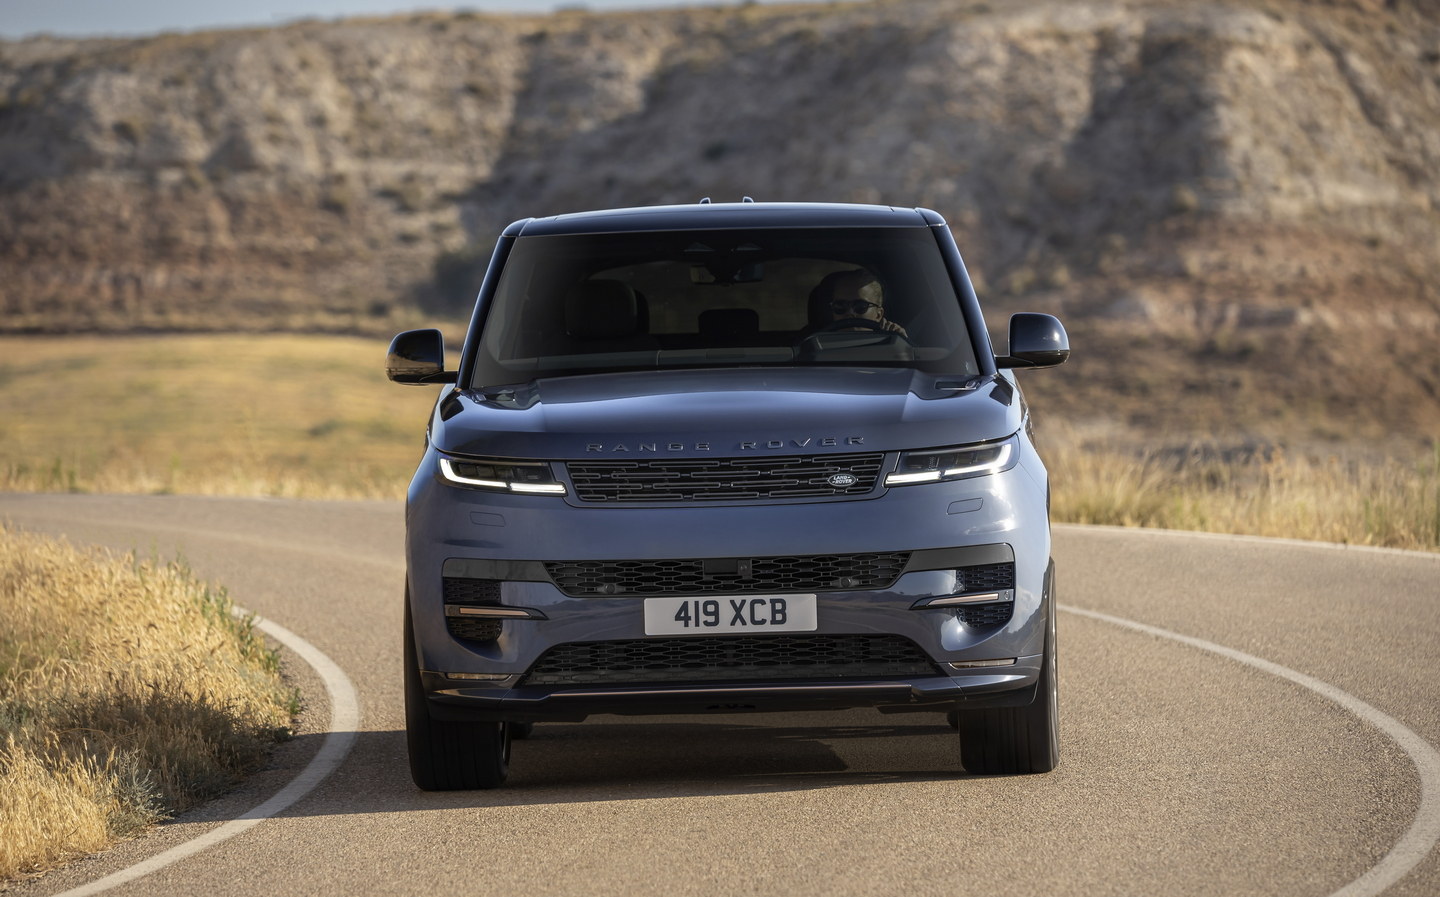 2022 Range Rover Evoque PHEV revealed as diesel dropped